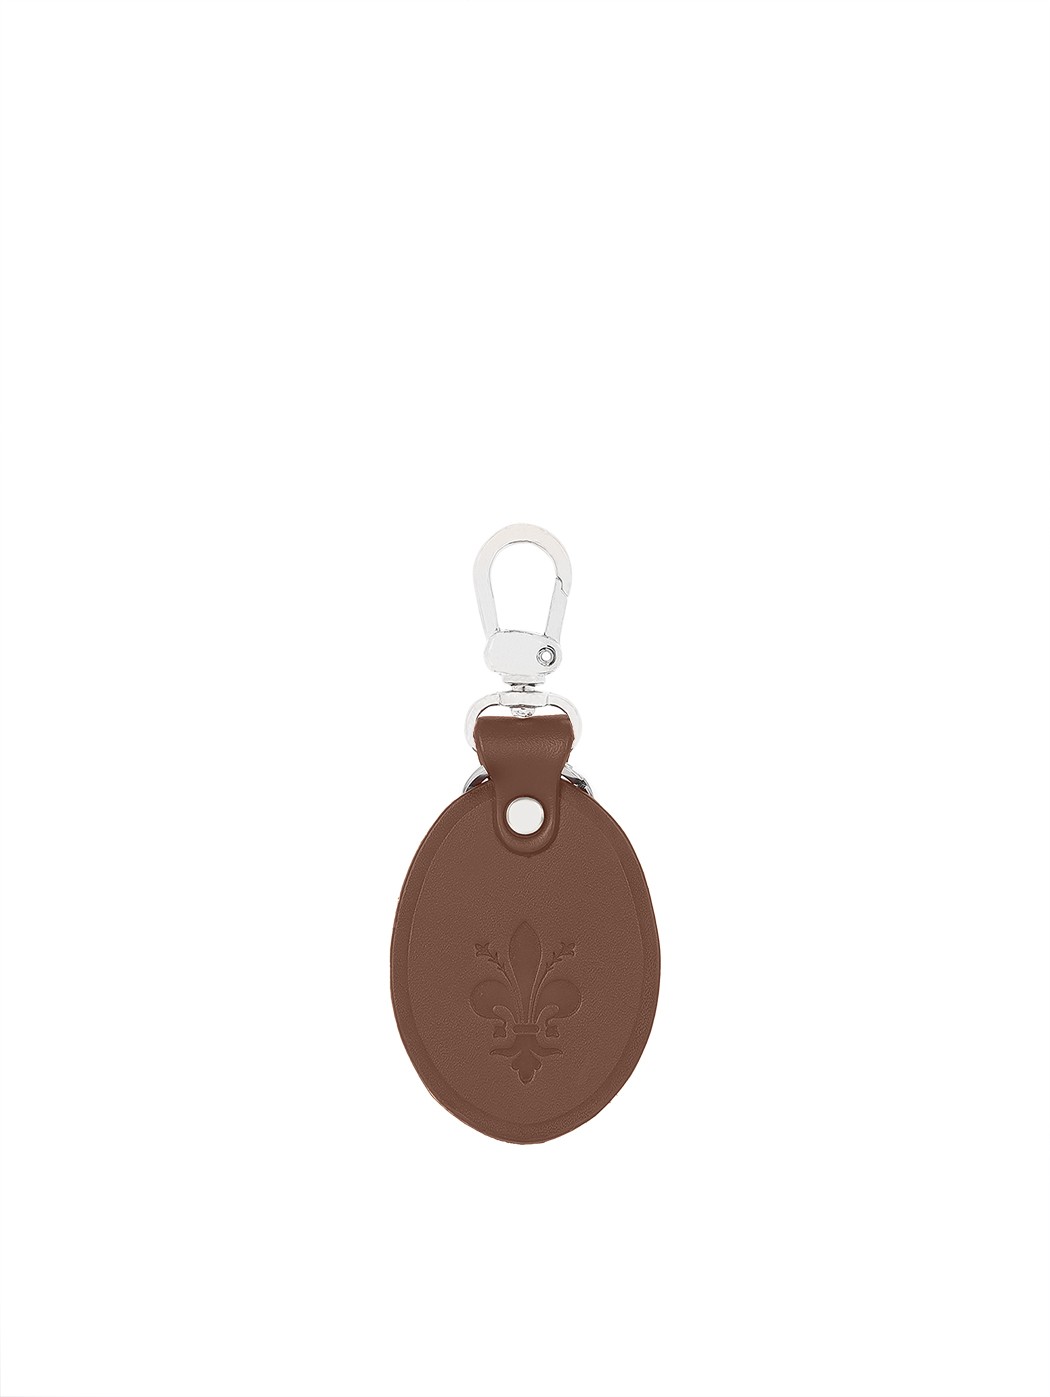 Cuoio Leather Key Lanyard, embossed Giglio Dark brown